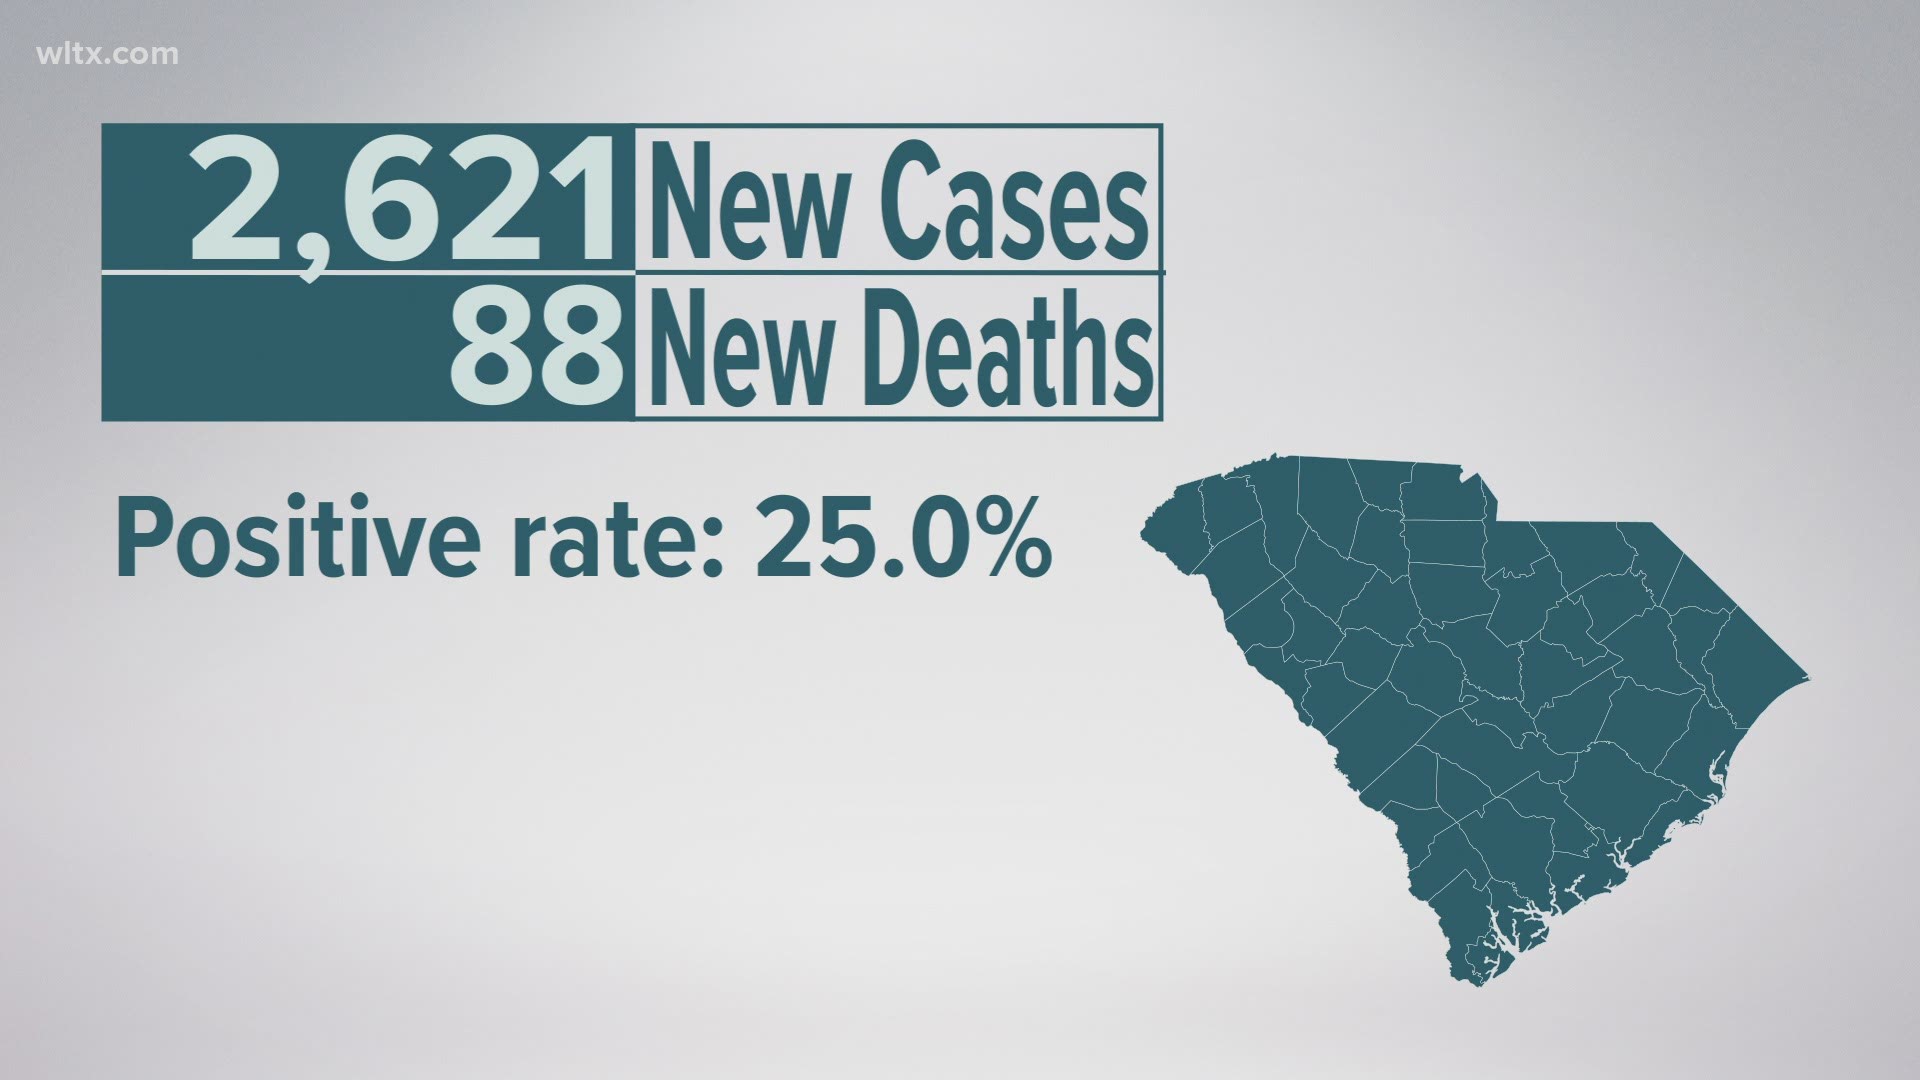 2,621 new cases of COVID-19 and 88 additional deaths were reported on Jan. 27.